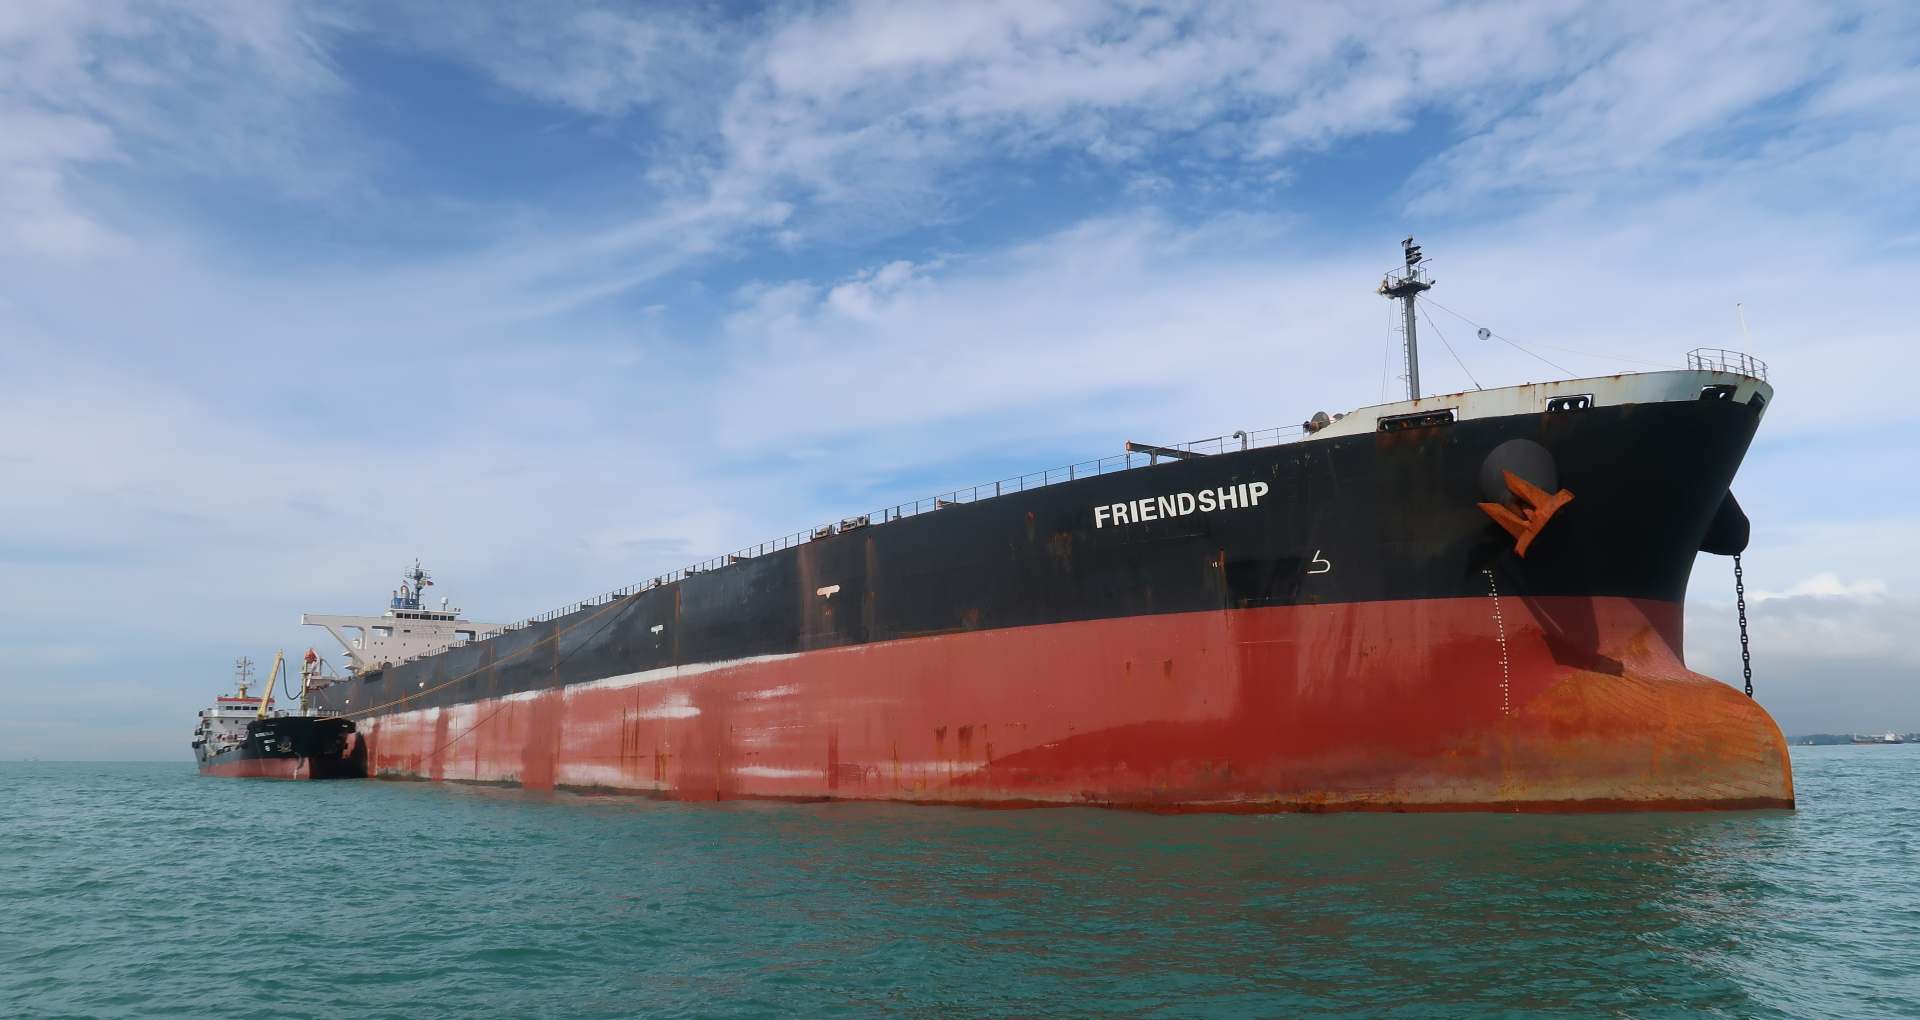 TotalEnergies biofuel bunker delivery to the MT Friendship bulk carrier in the port of Singapore